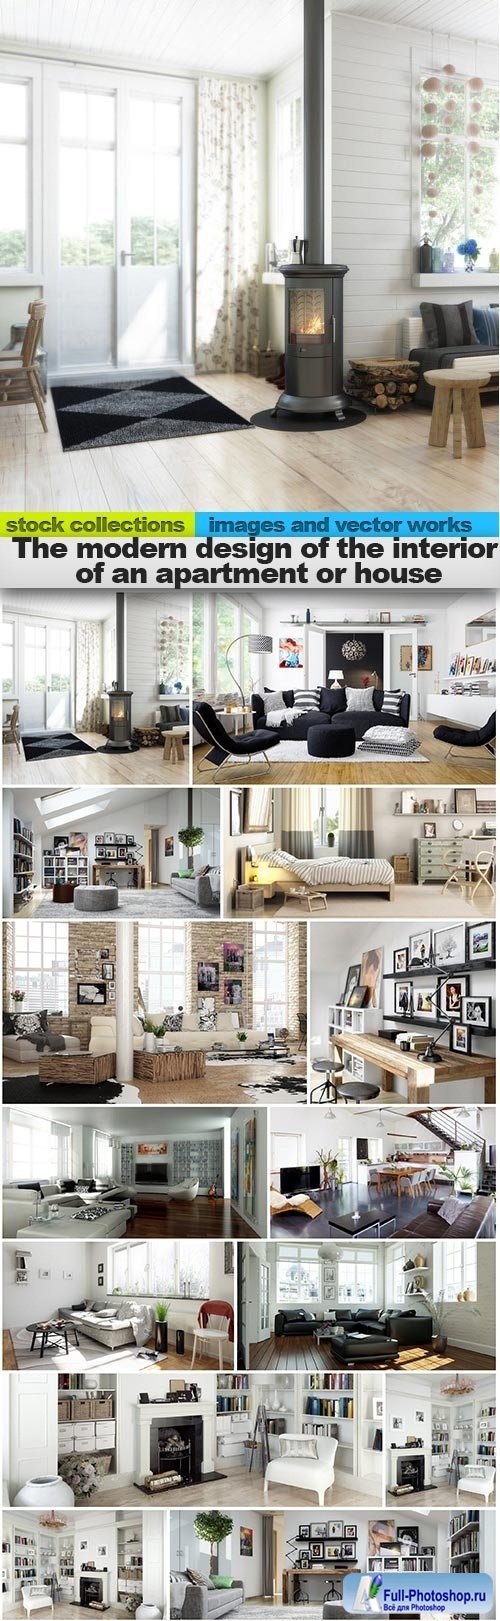 The modern design of the interior of an apartment or house, 15 x UHQ JPEG